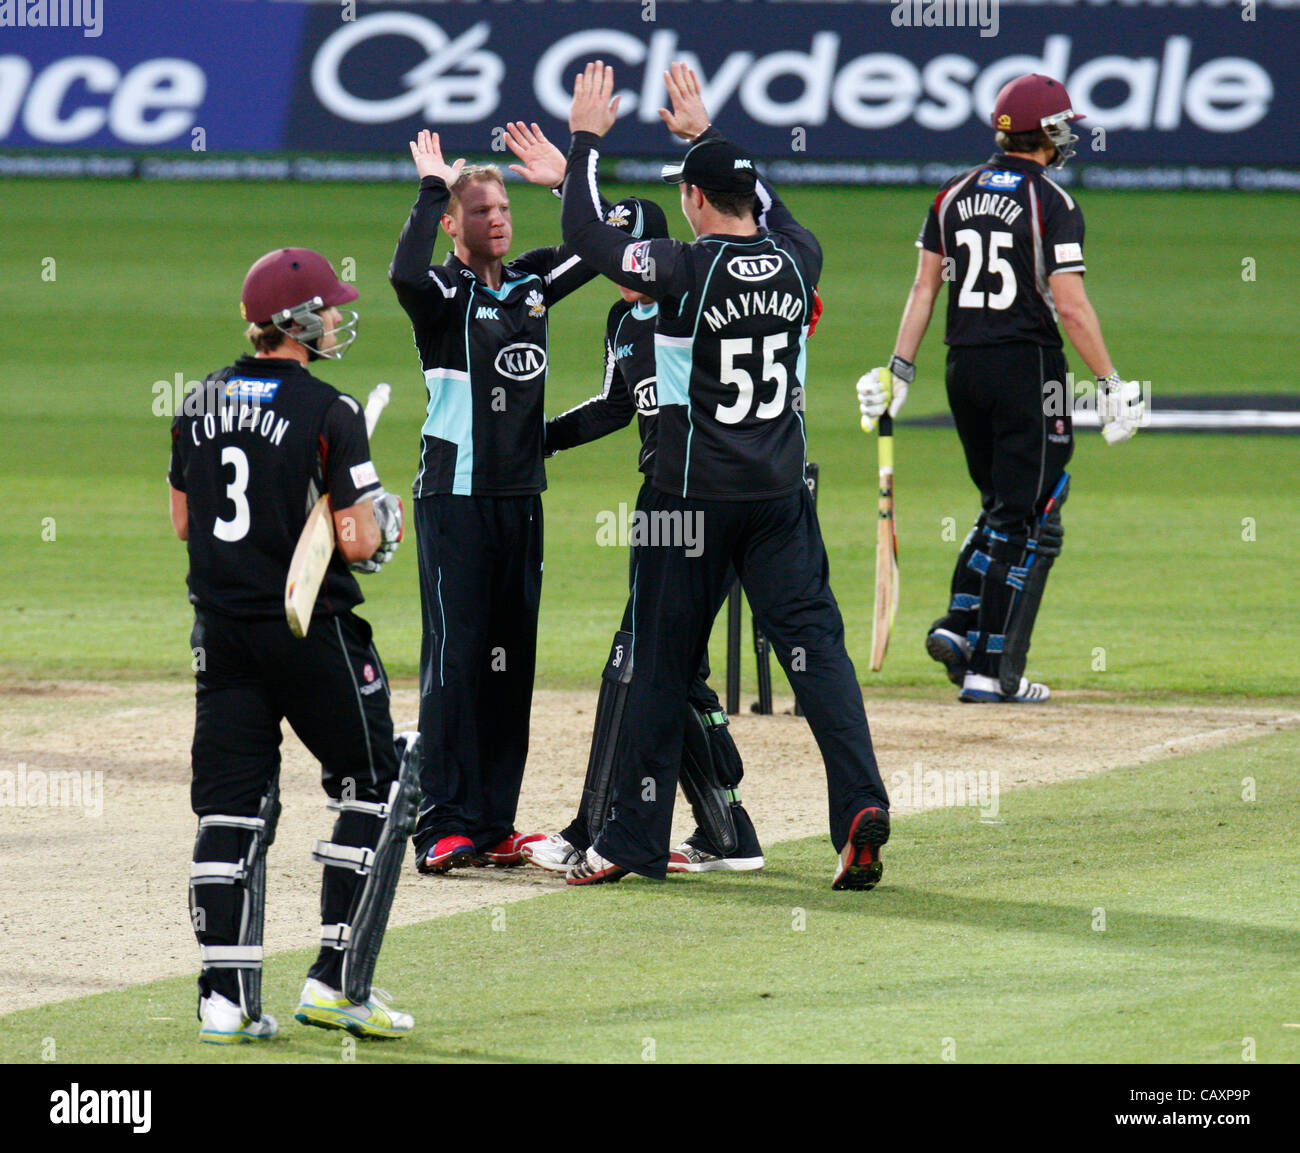 04.05.2012. Brit Oval, London, England. Gareth Batty of Surrey County Cricket and Steven Davies of Surrey County Cricket celebrates the wicket of James Hildreth of Somerset County Cricket during the Clydesdale Bank Pro40 match between Surrey and Somerset  at The Brit Oval on May 04, 2012 in London,  Stock Photo